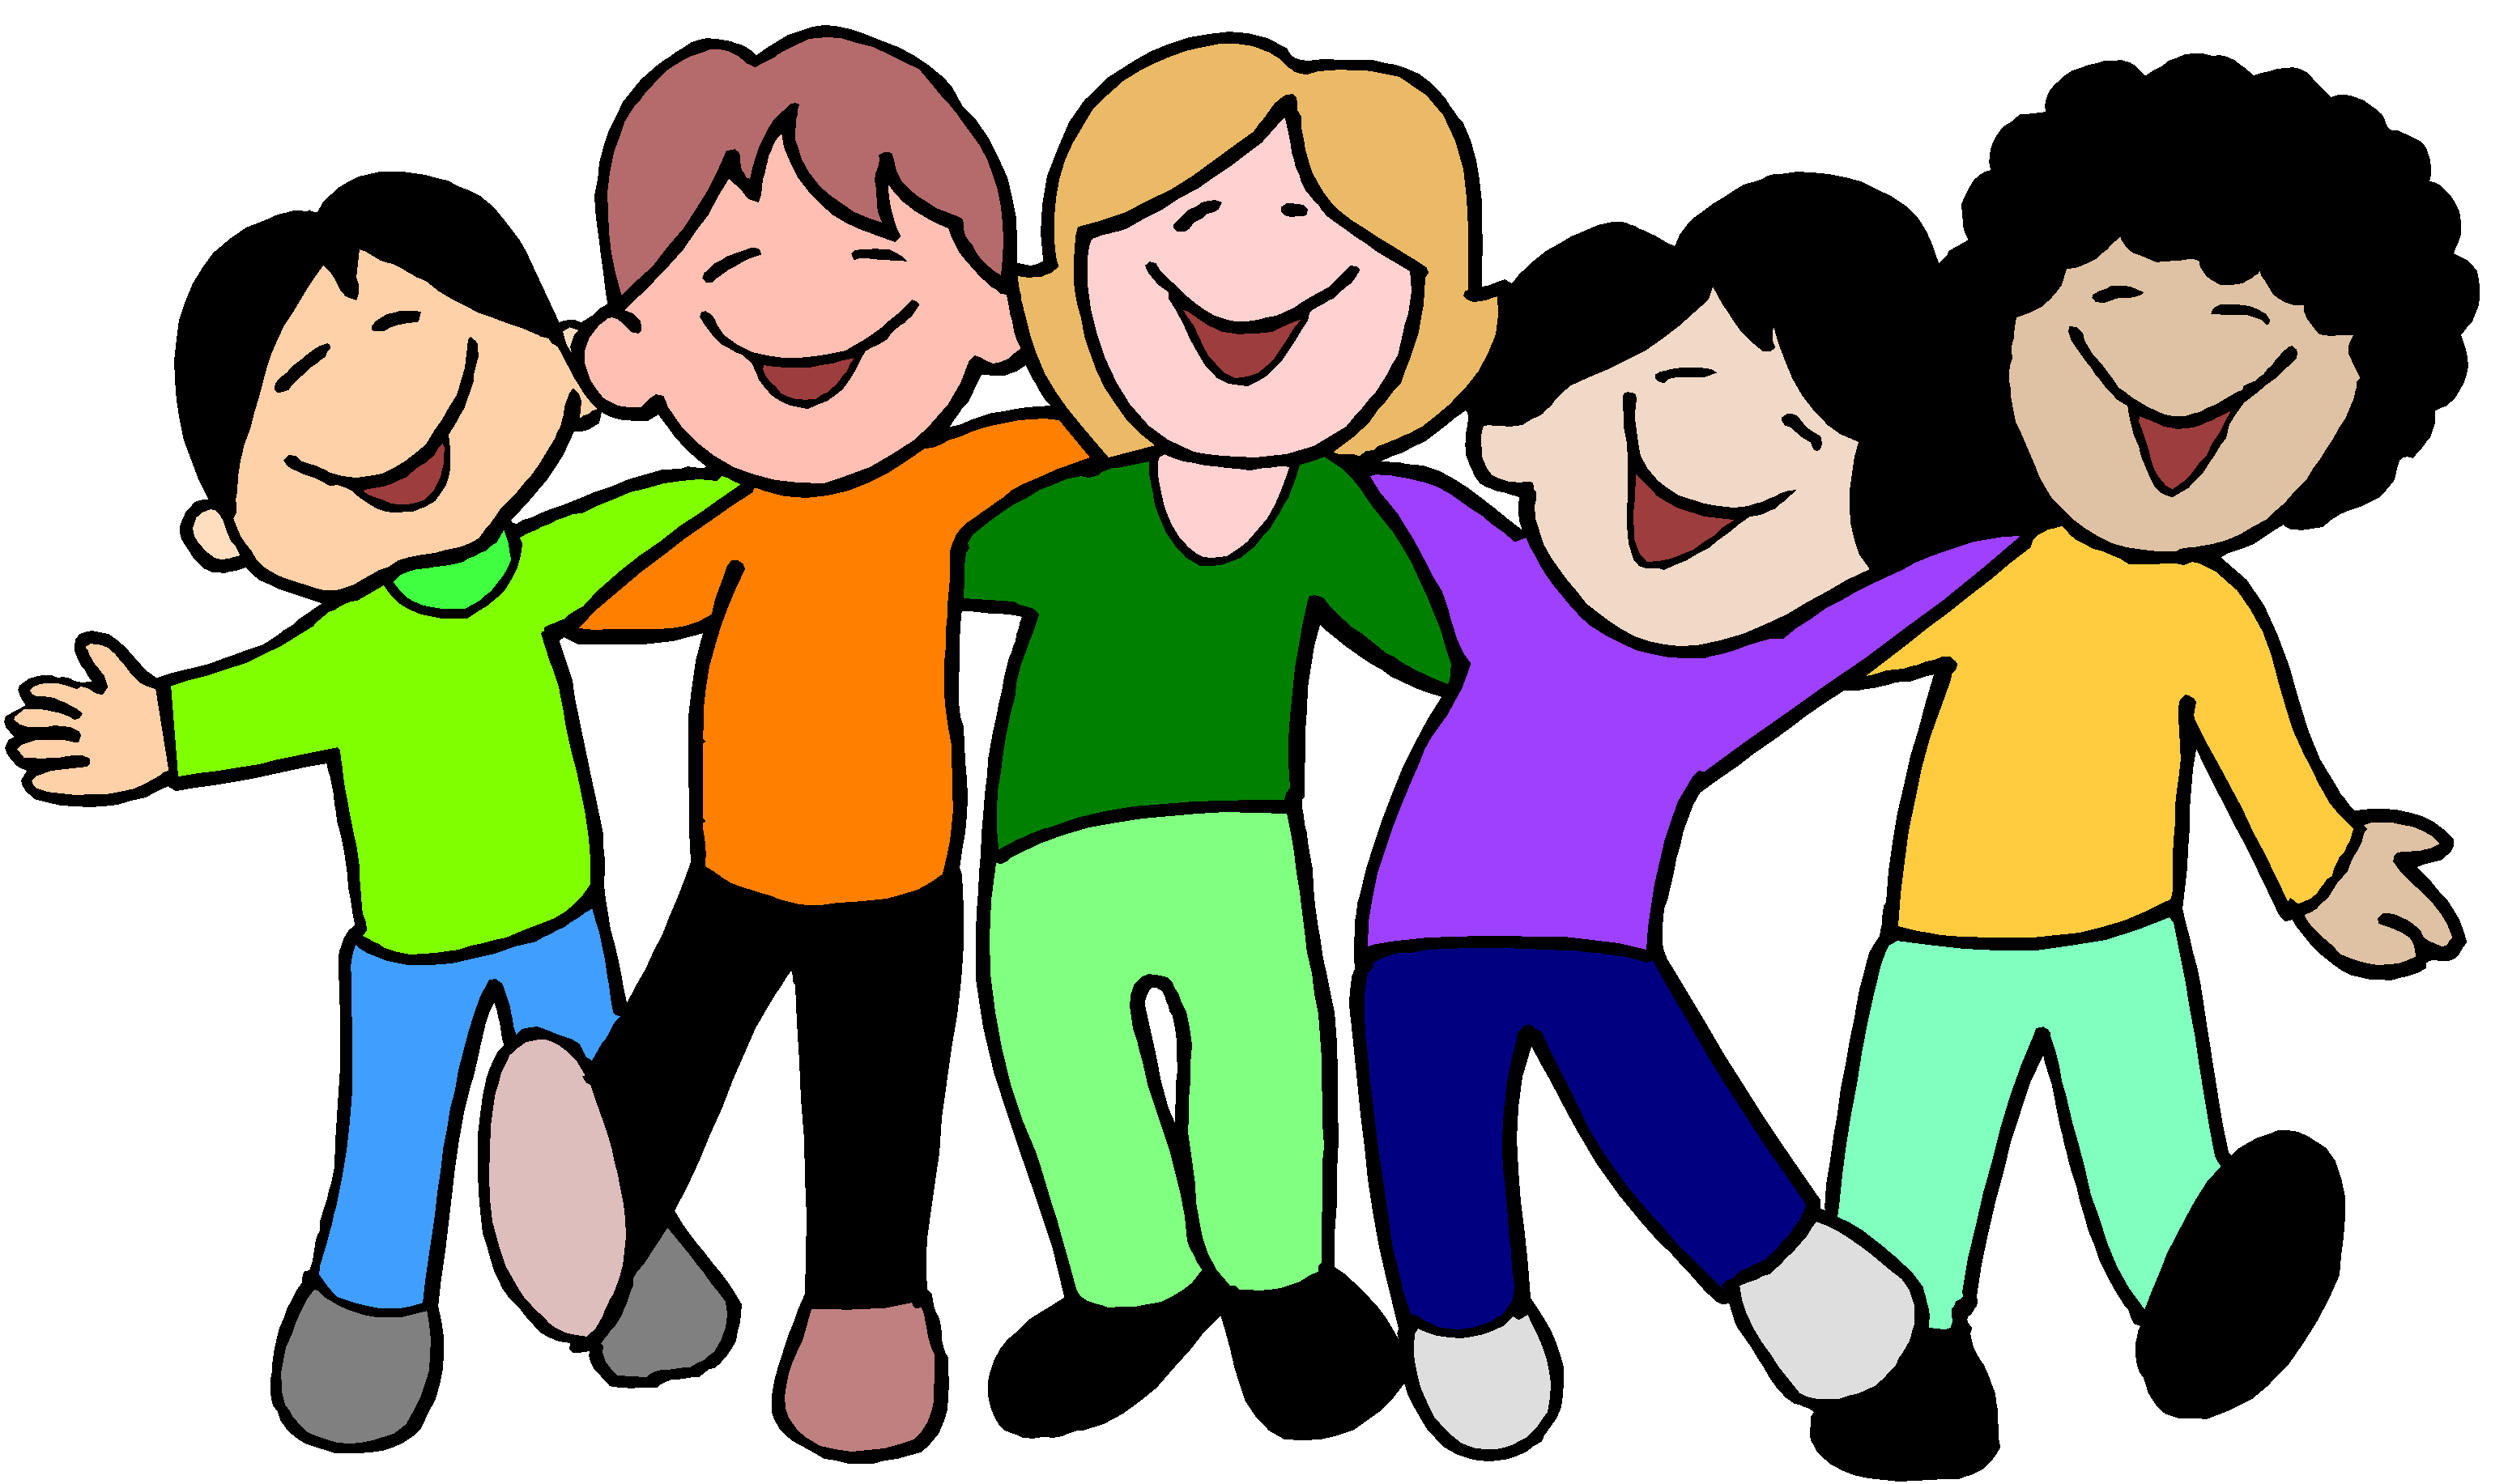 Clipart images of children playing